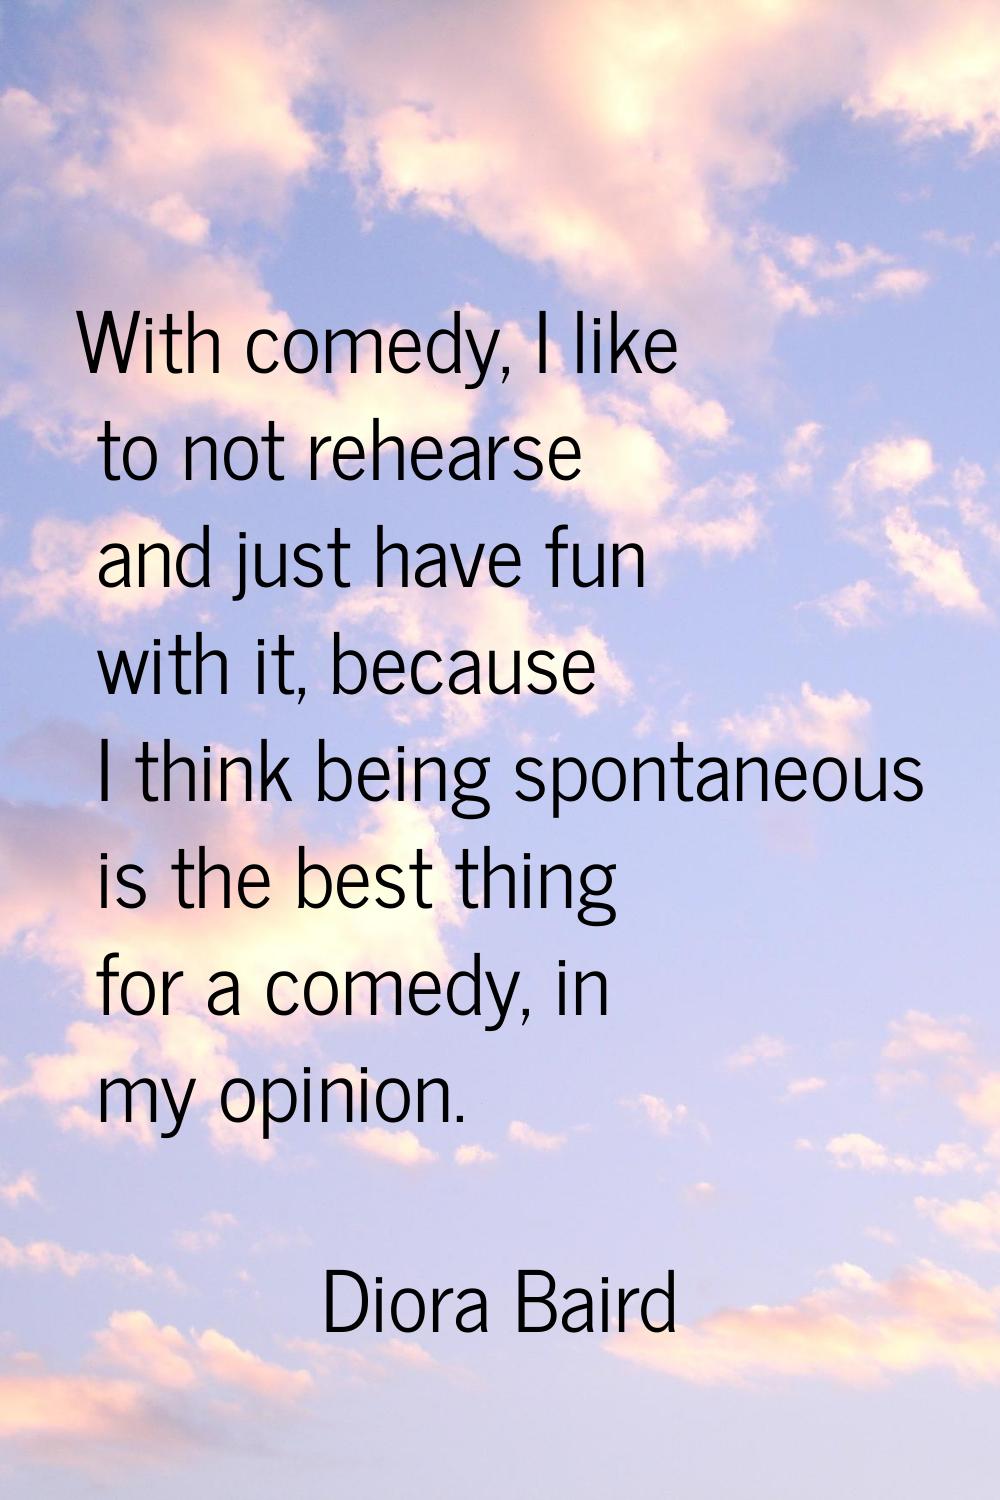 With comedy, I like to not rehearse and just have fun with it, because I think being spontaneous is